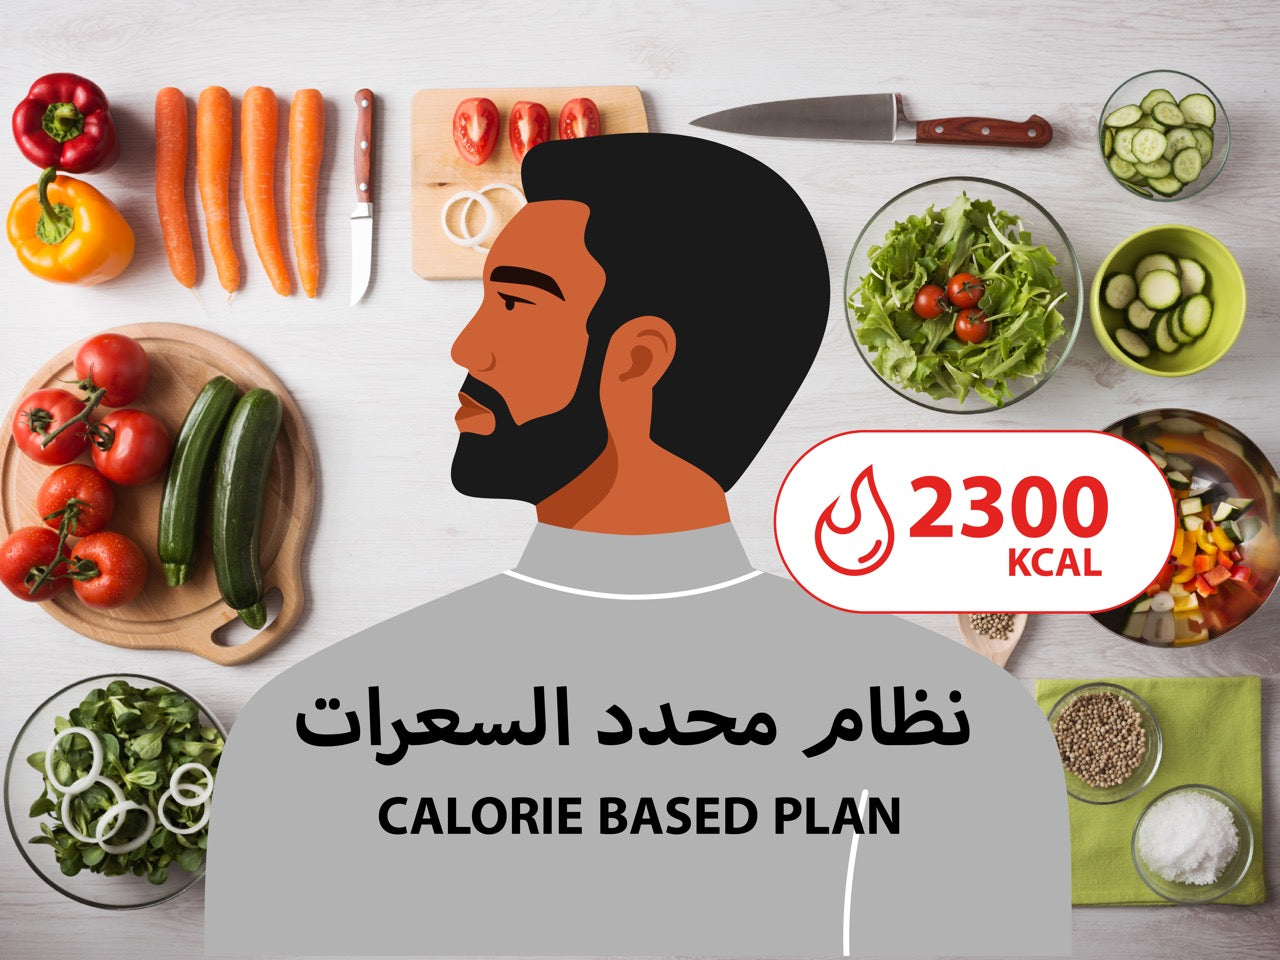 Calorie Based Diet for Males (2300 Kcal)